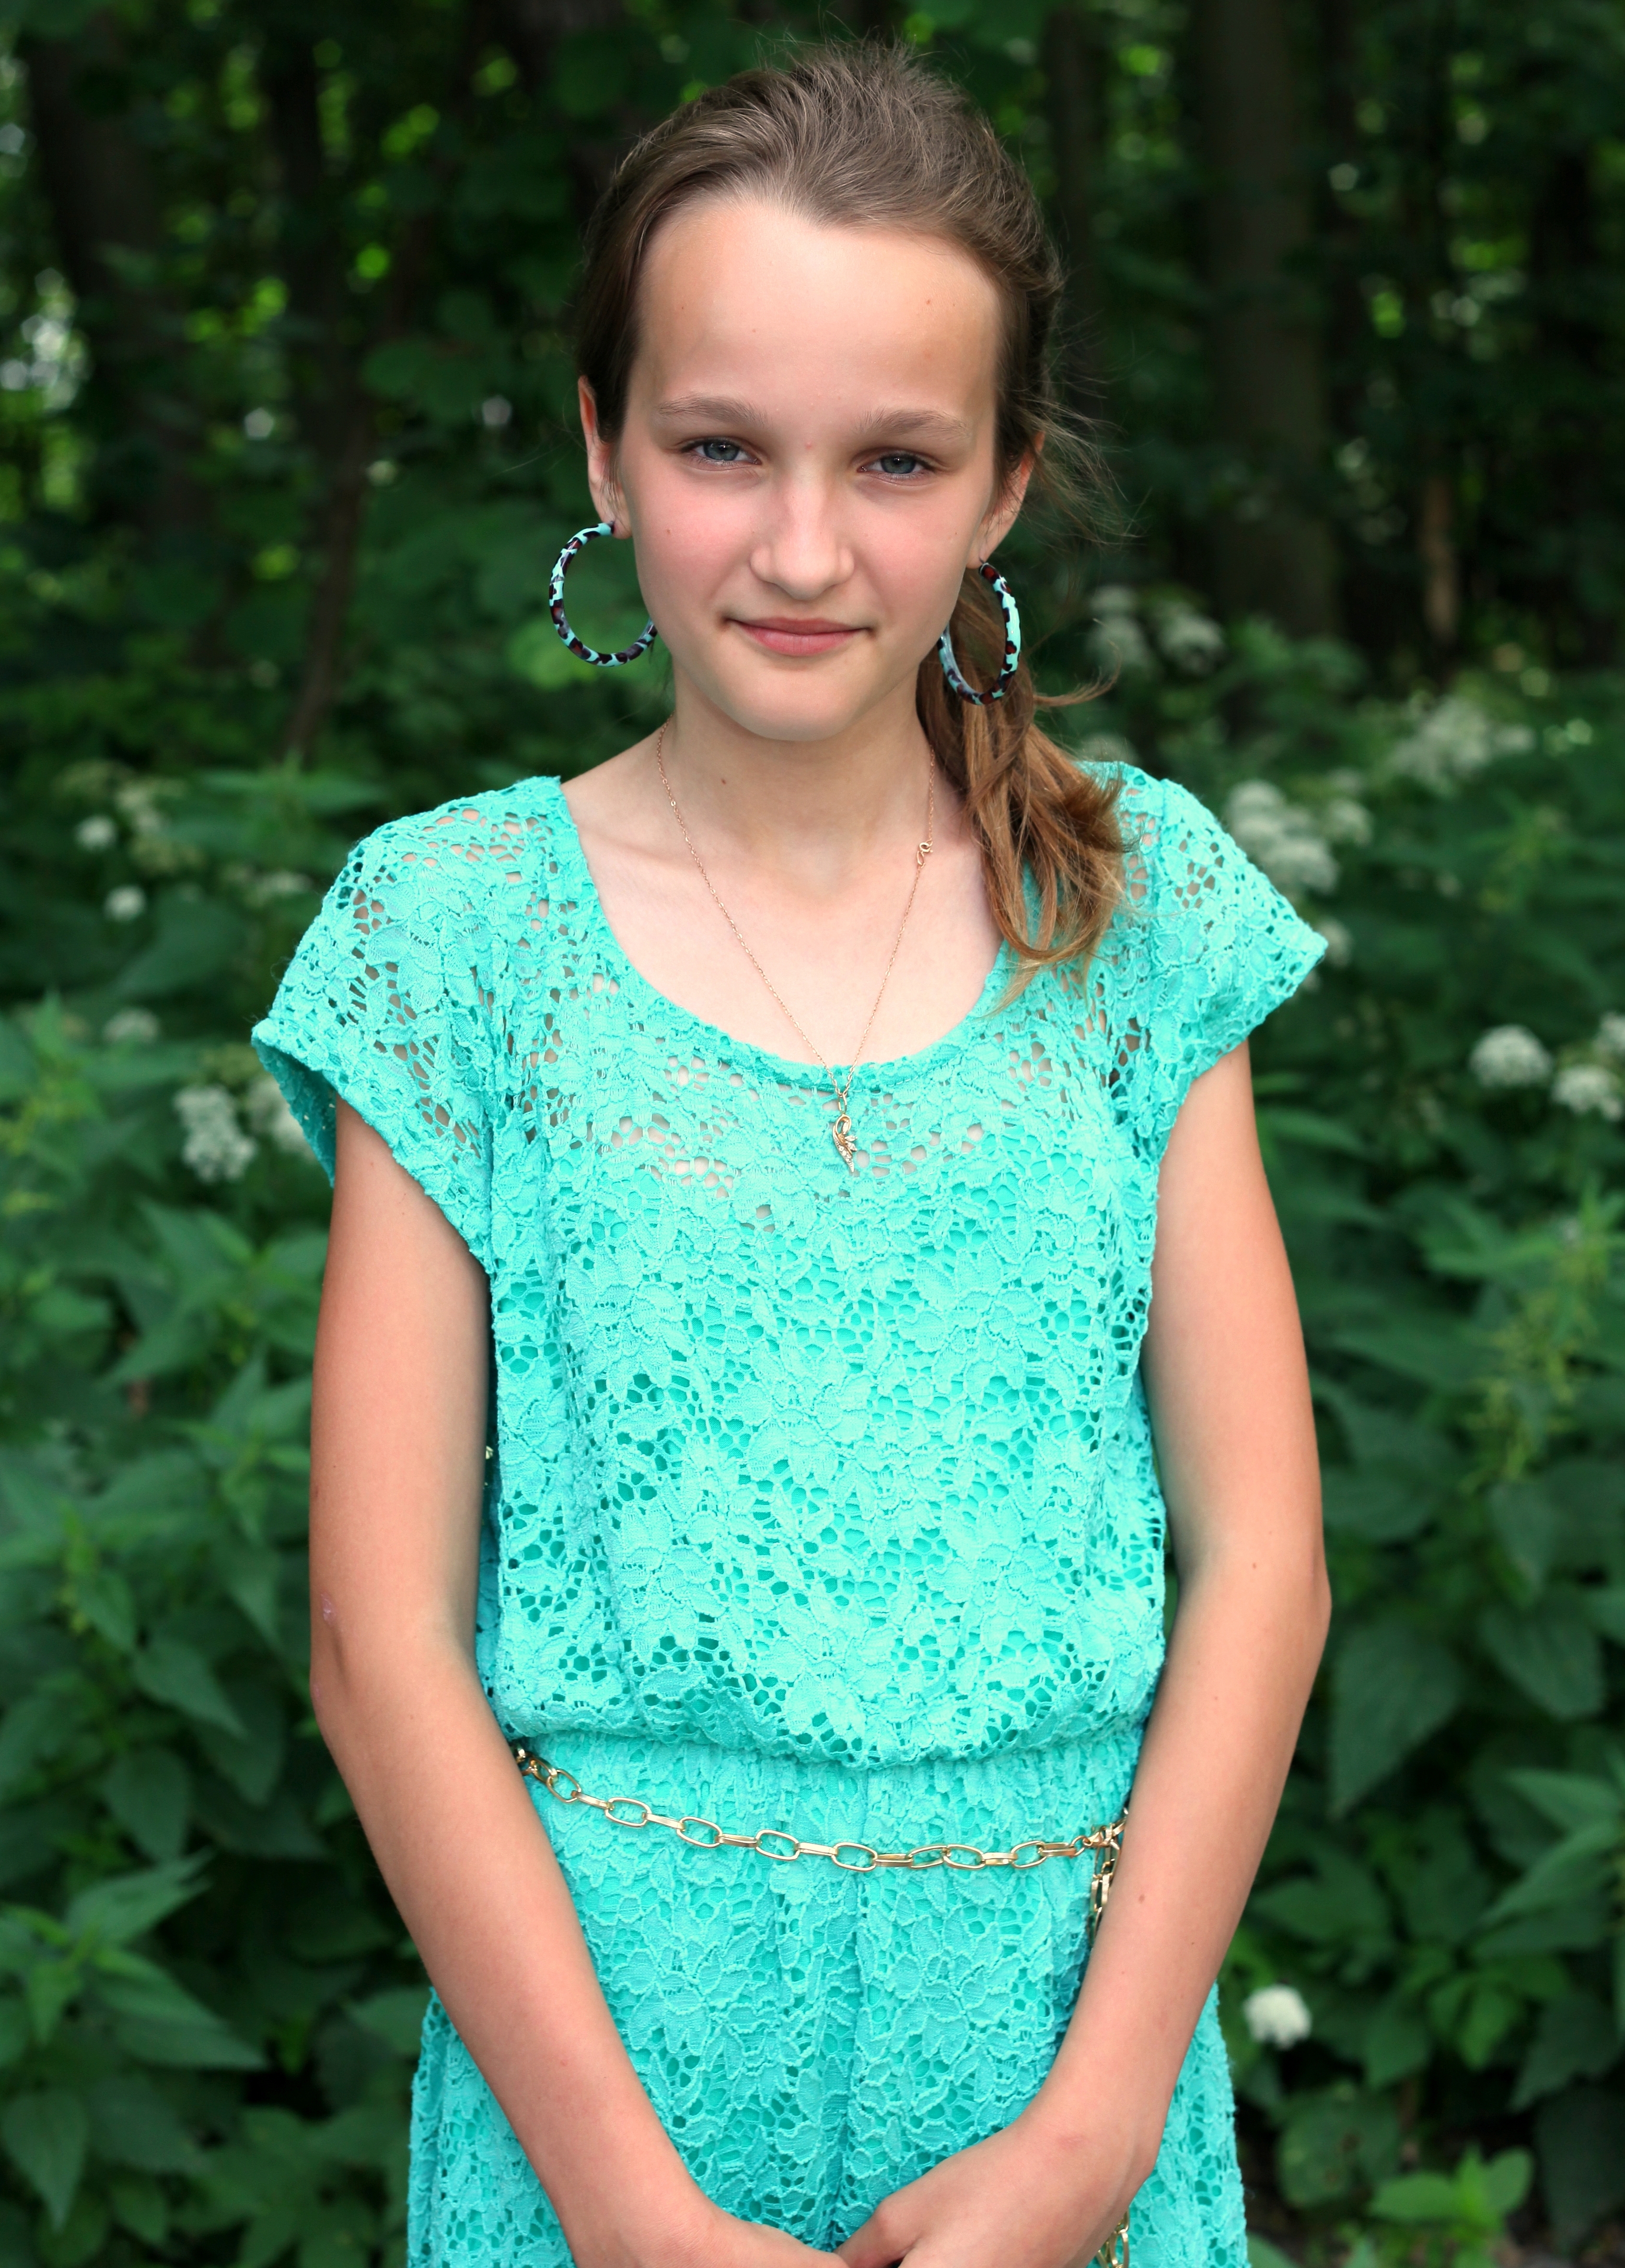 an absolutely beautiful girl with huge earrings, photographed in June 2013, portrait 2/27